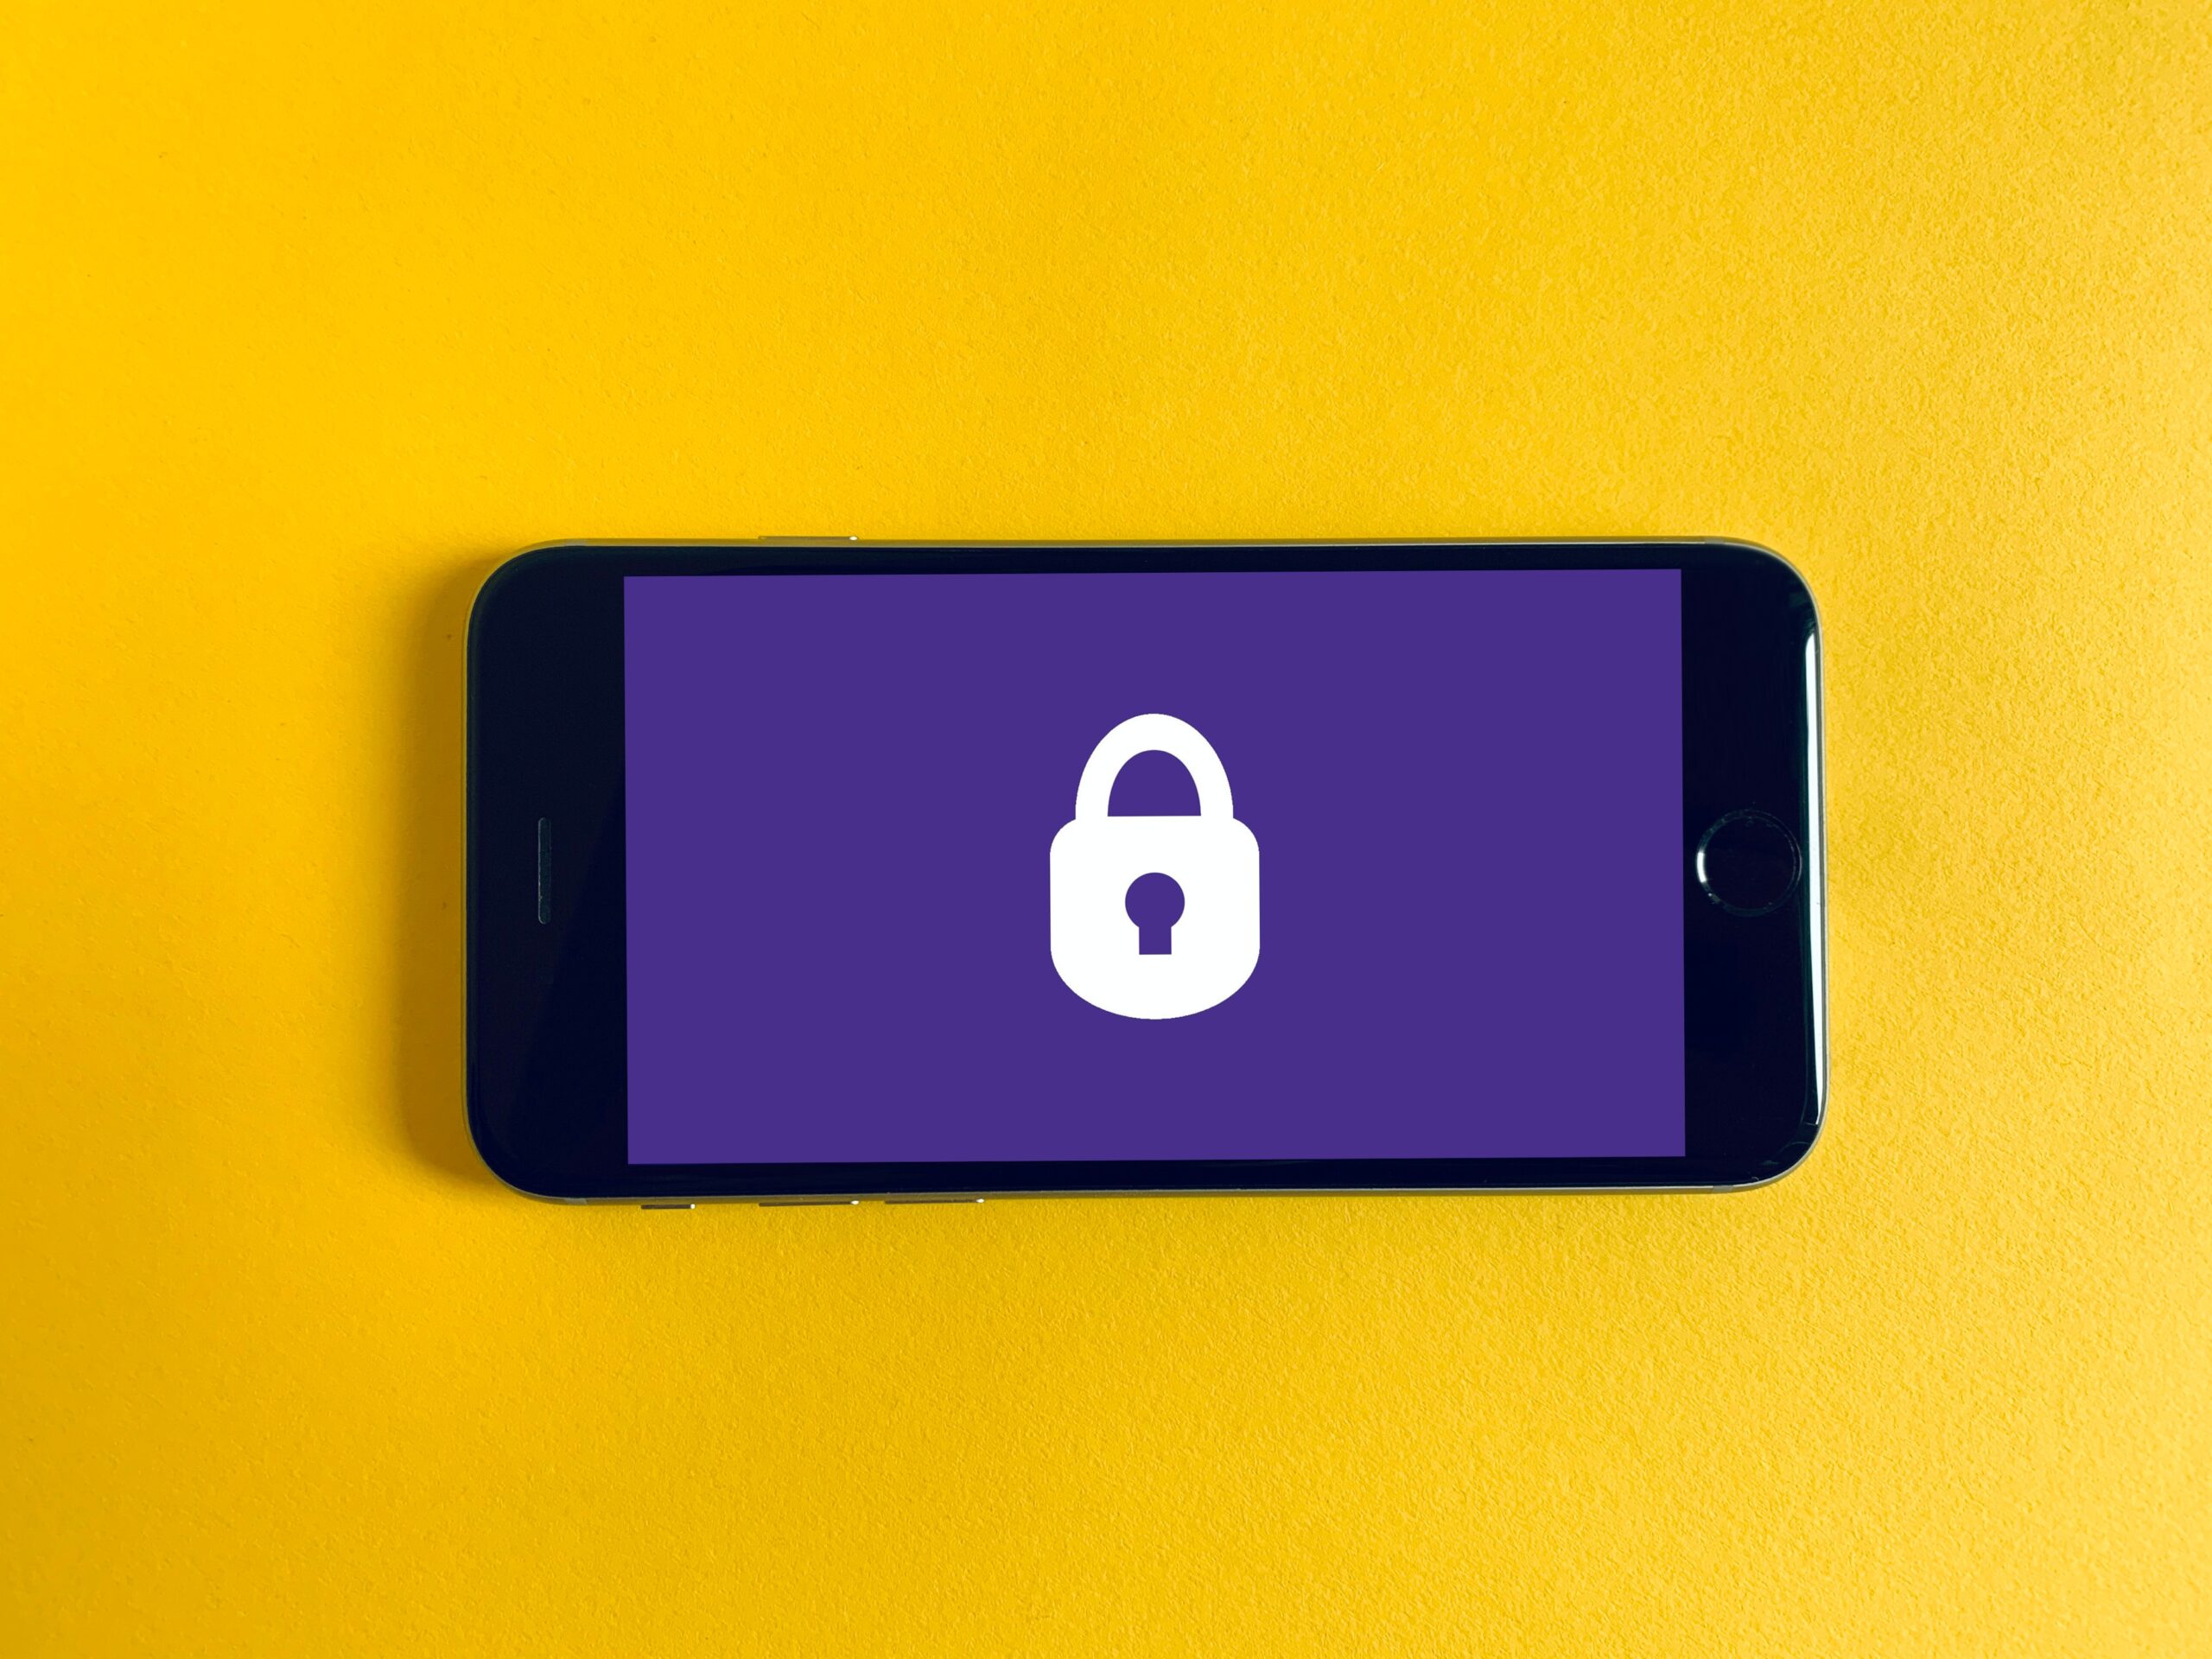 Image showing an iphone screen that shows a purple image and white padlock. The iphone sits on a yellow background. Image used to illustrate content about the security of an online donation facility.